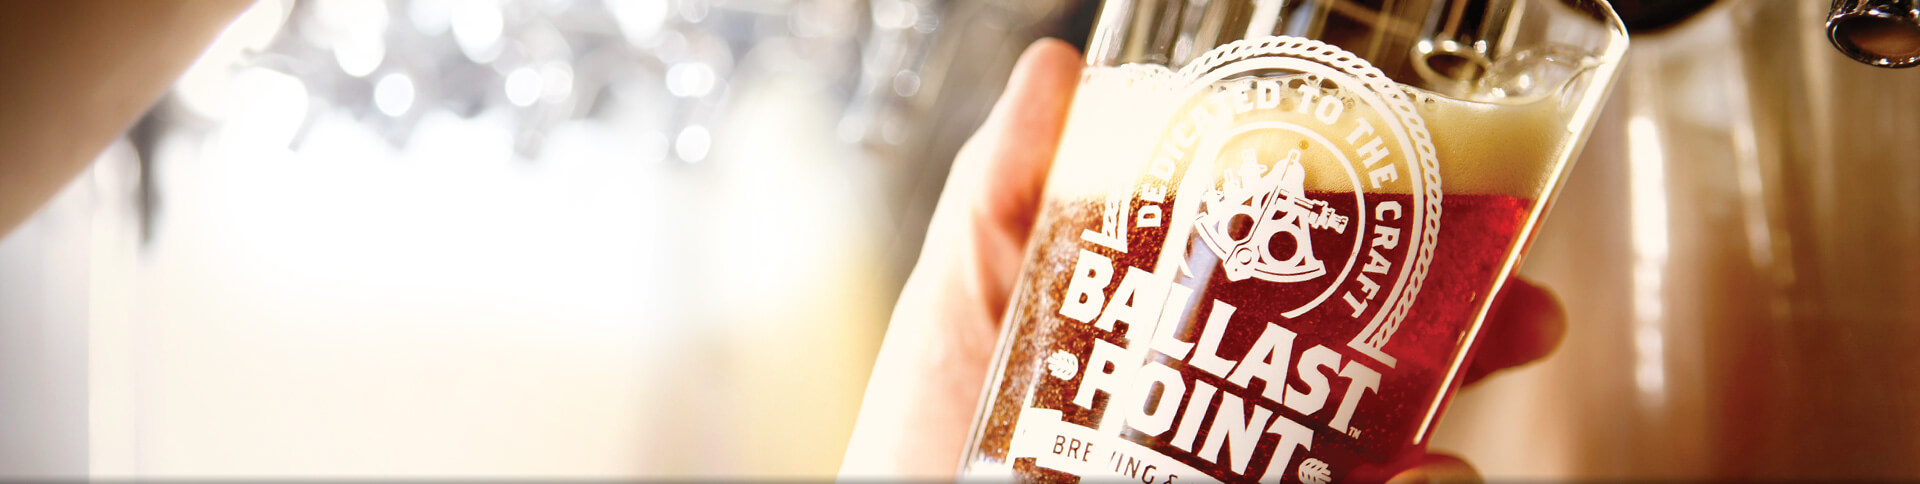 Pouring Ballast Point pint